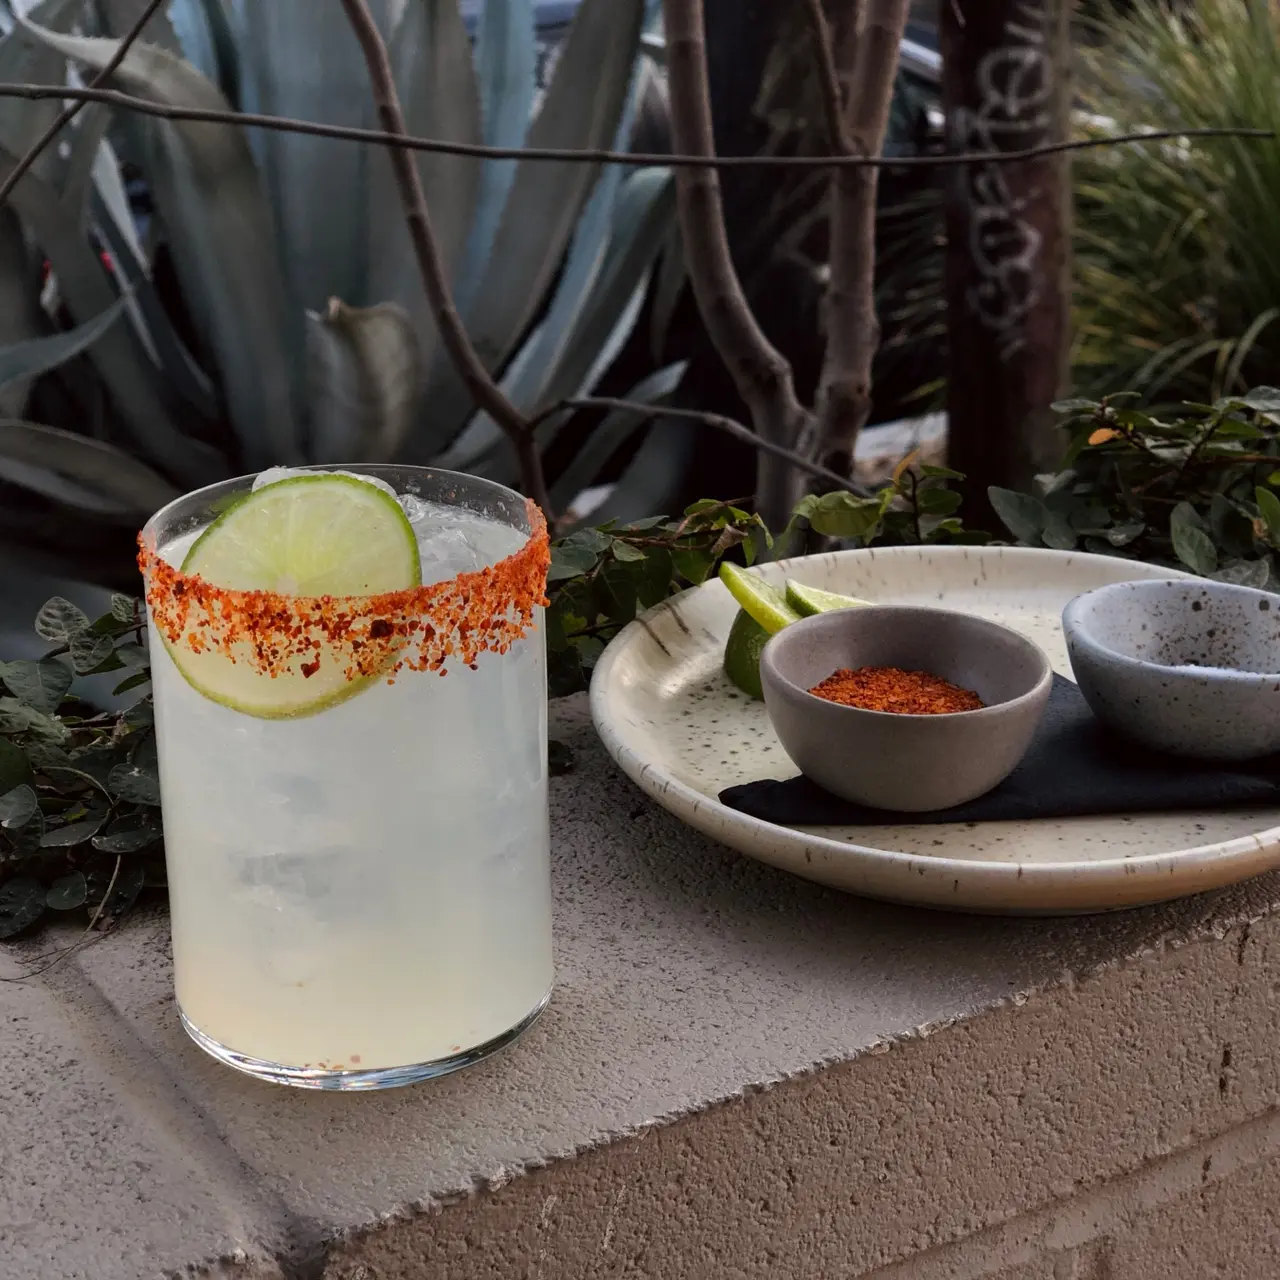 A refreshing drink with a rim coated in red seasoning sits beside a bowl of chili powder and lime wedges on an outdoor ledge with greenery in the background.